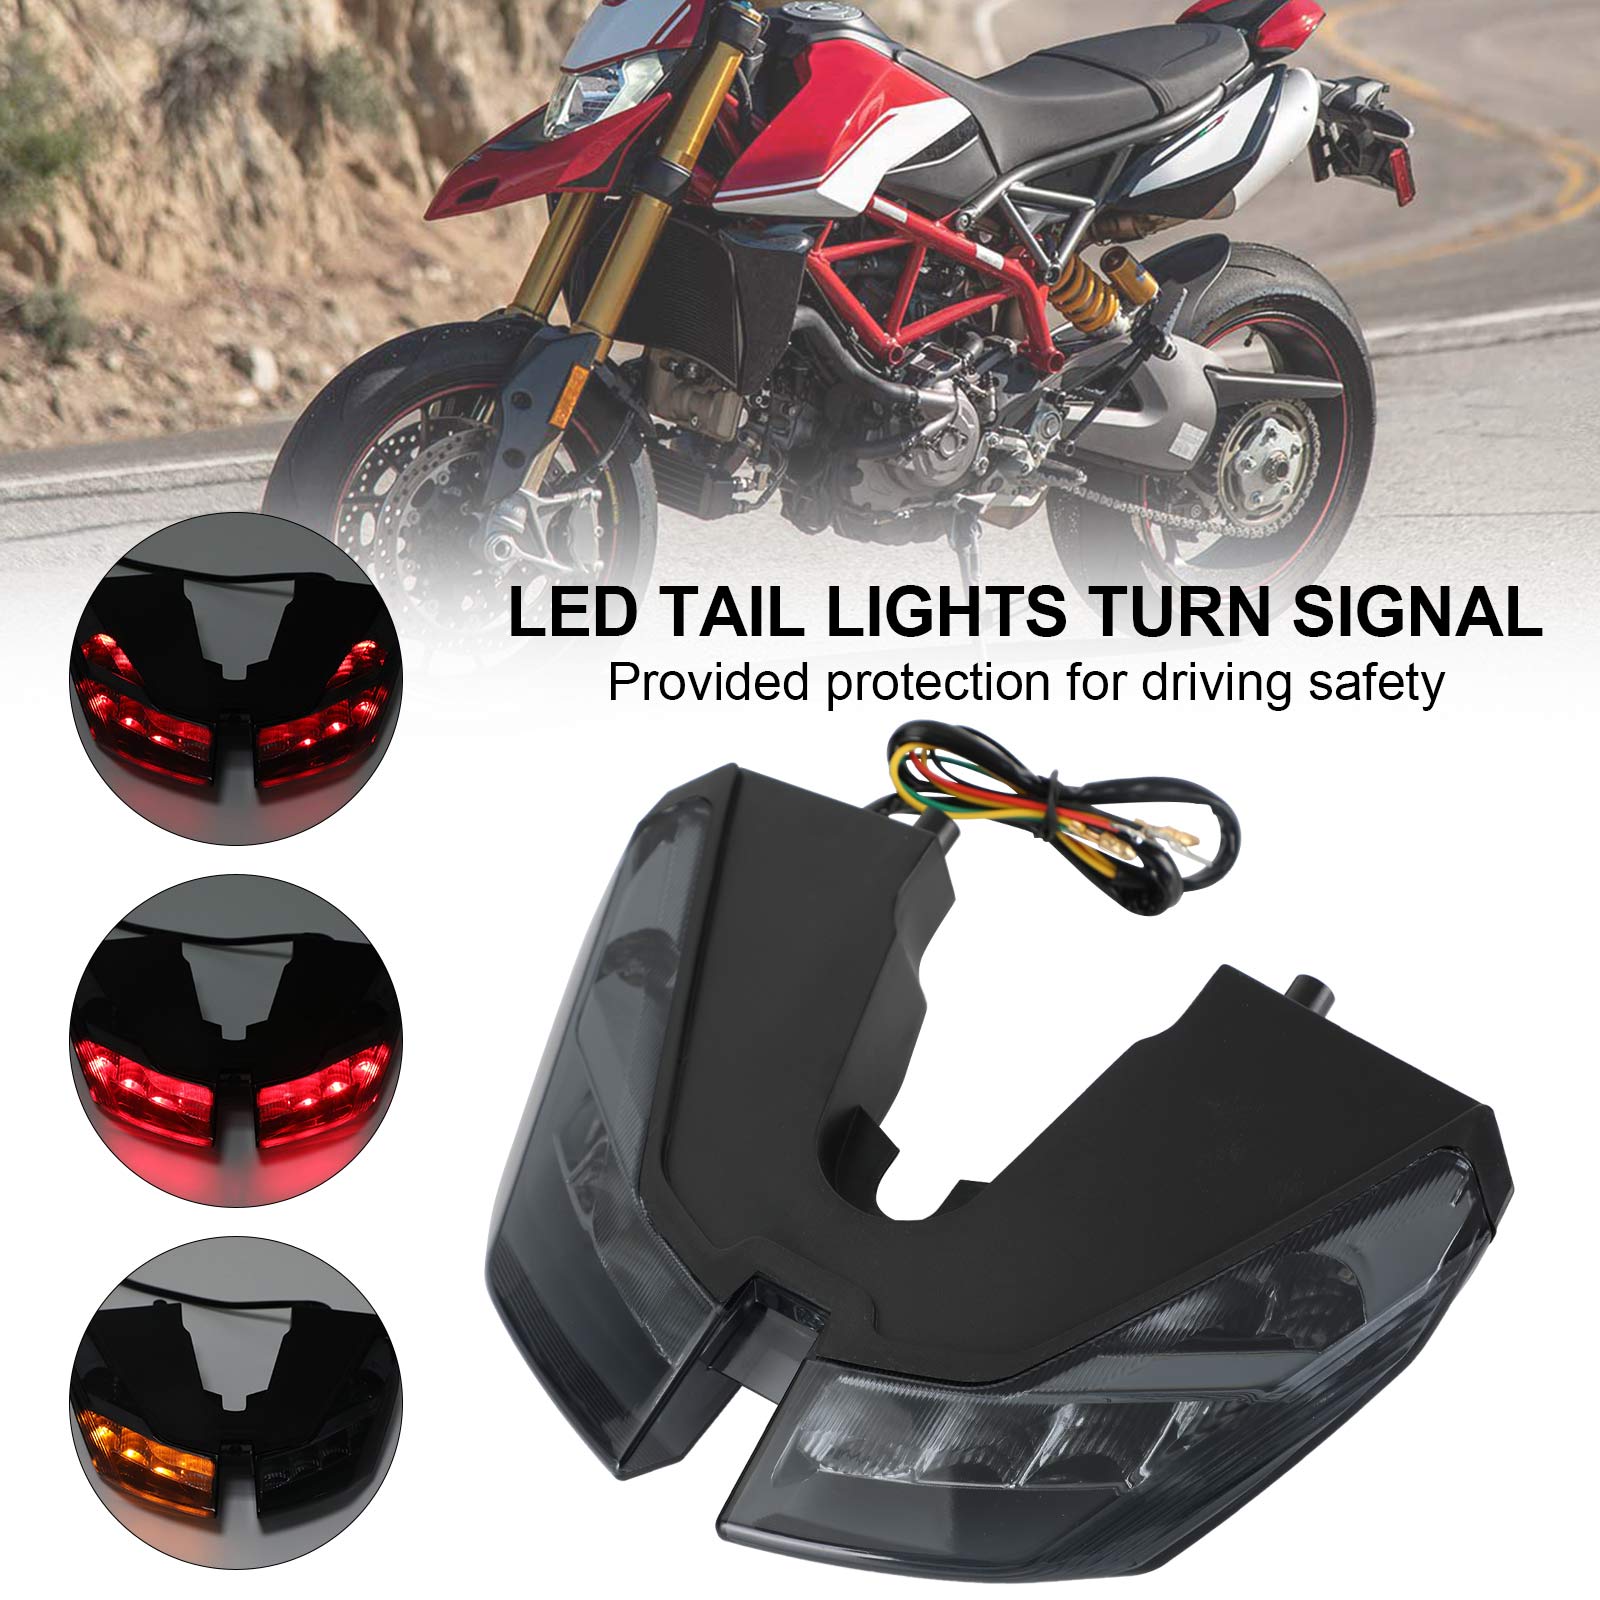 Tail Lights Turn Signal For DUCATI HYPERMOTARD 821 939 950 SP 2012-2021 Generic